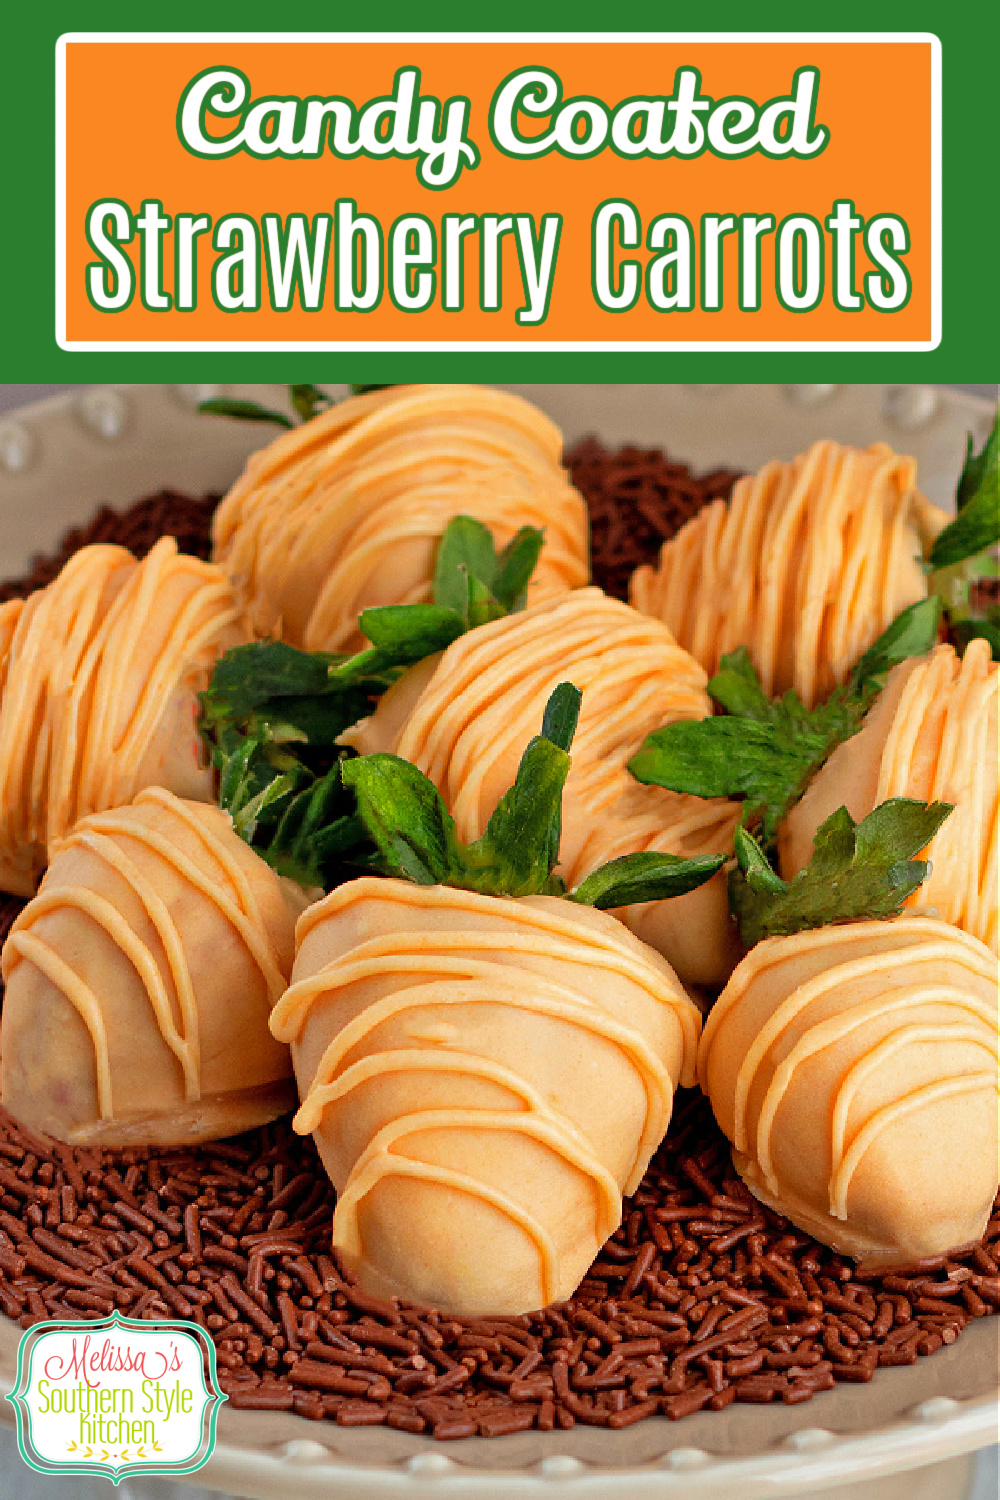 You'll love making these cute as a button Candy Coated Strawberry Carrots to add to your Spring desserts this year. #strawberrydesserts #strawberries #strawberrycarrots #candycoatedstrawberry #easterrecipes #easterdesserts #candyrecipes